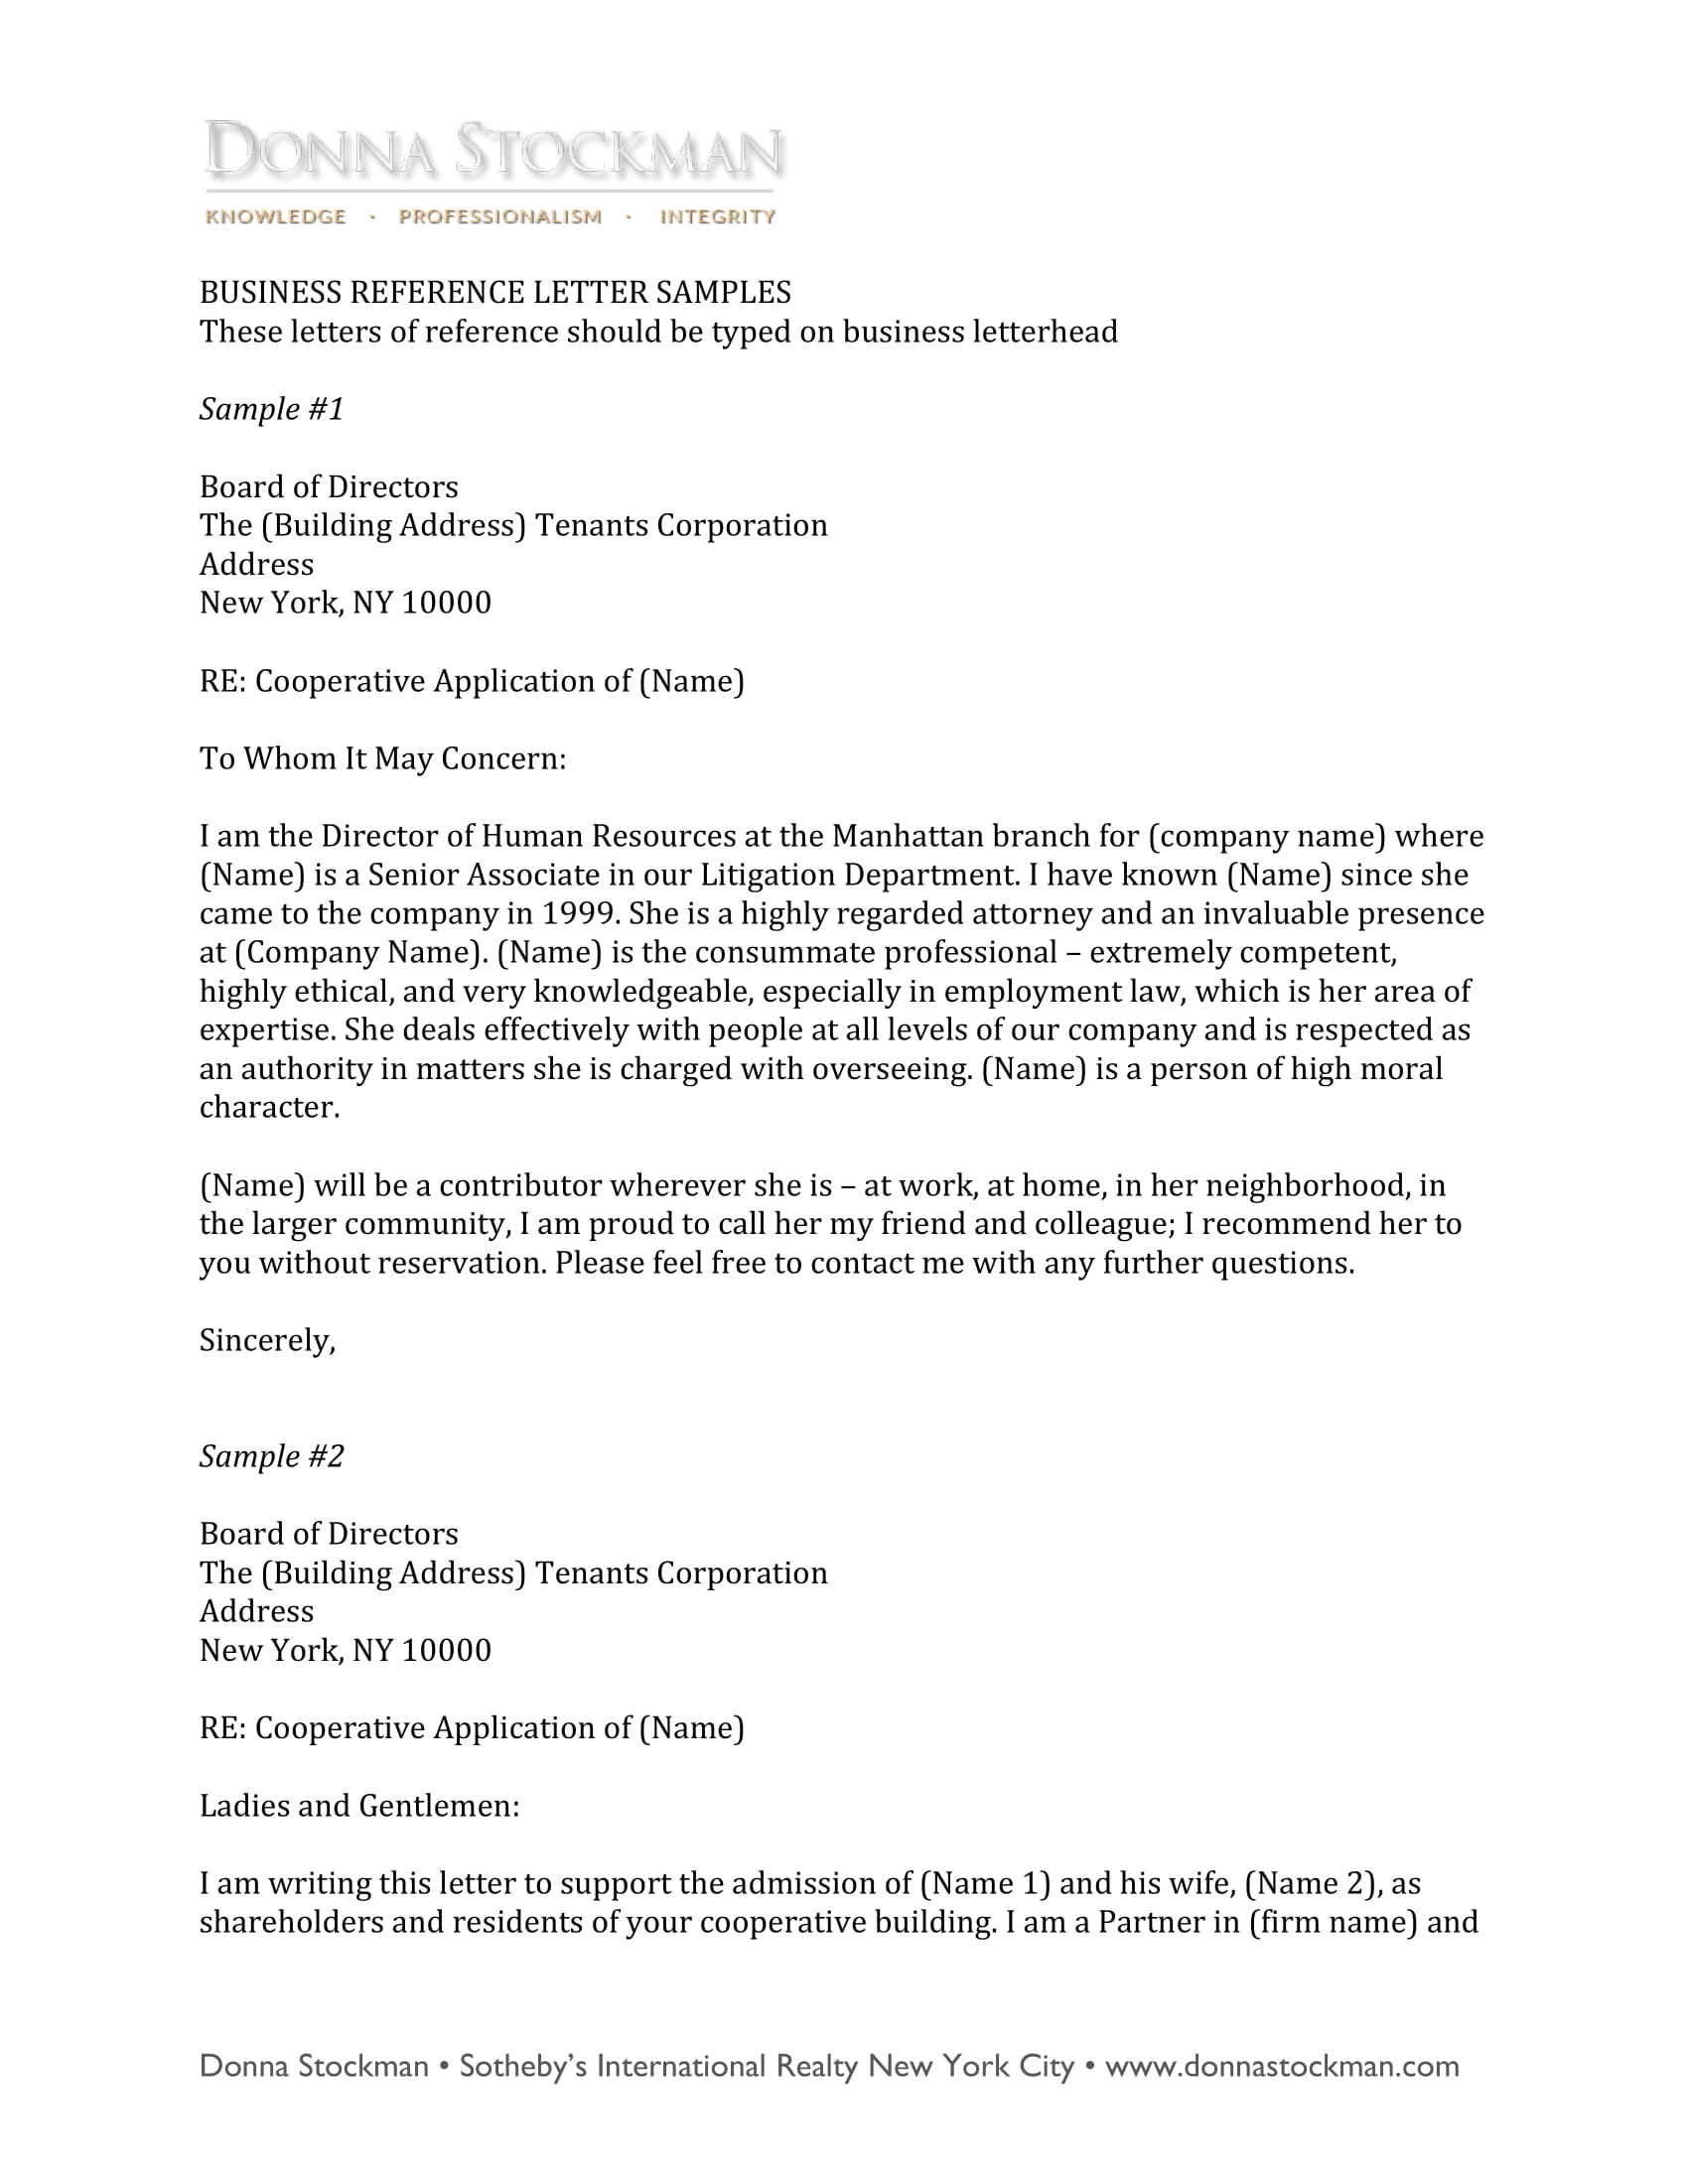 Business Reference Letter Template 10 Business Reference Letter Examples Pdf